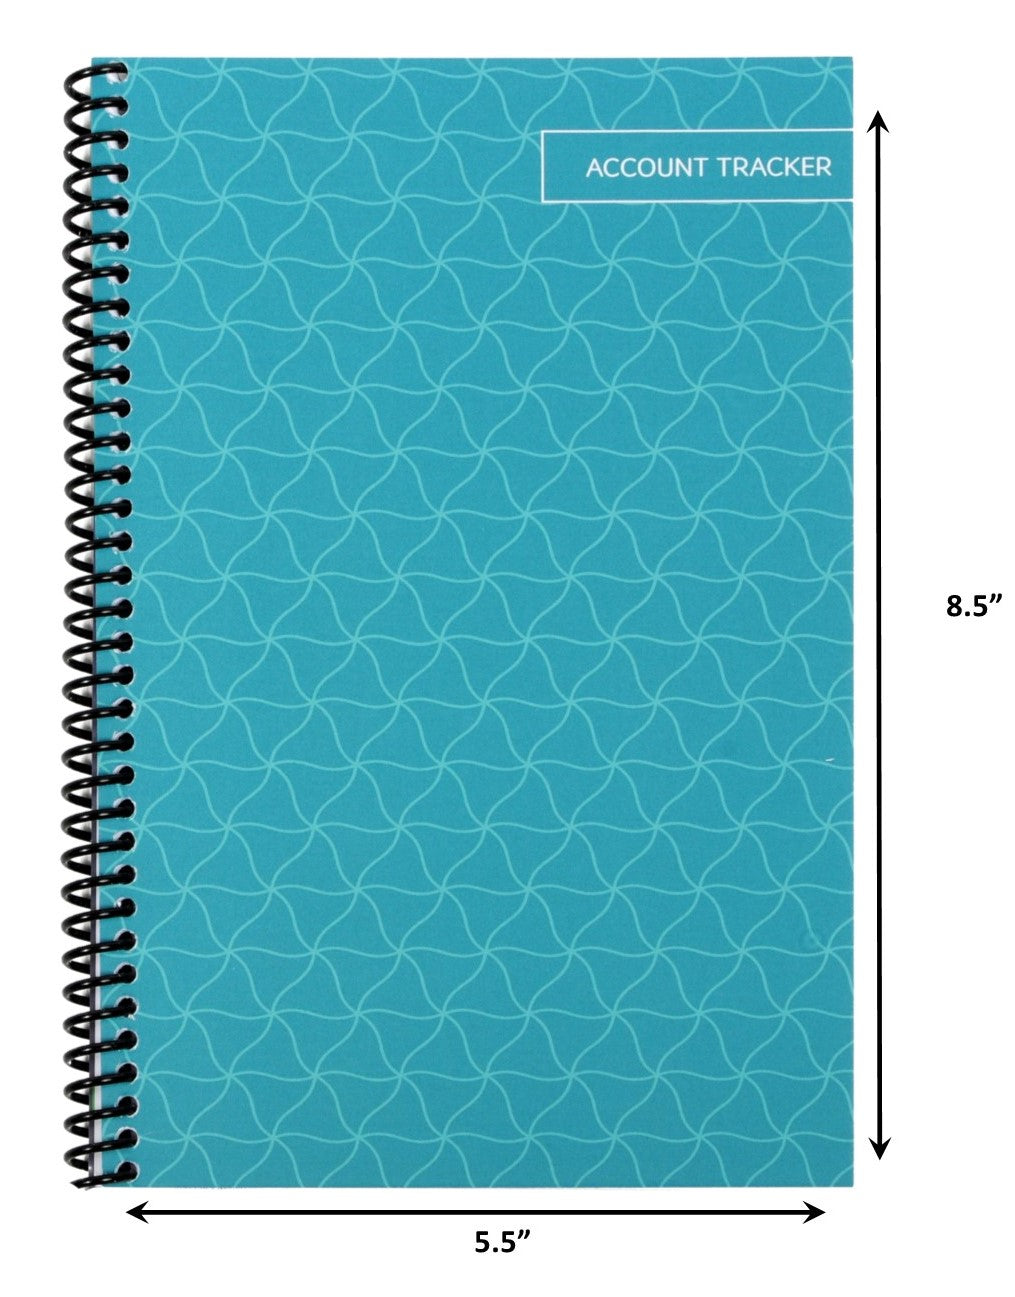 The Superior Check and Debit Card Register - Teal, Standard